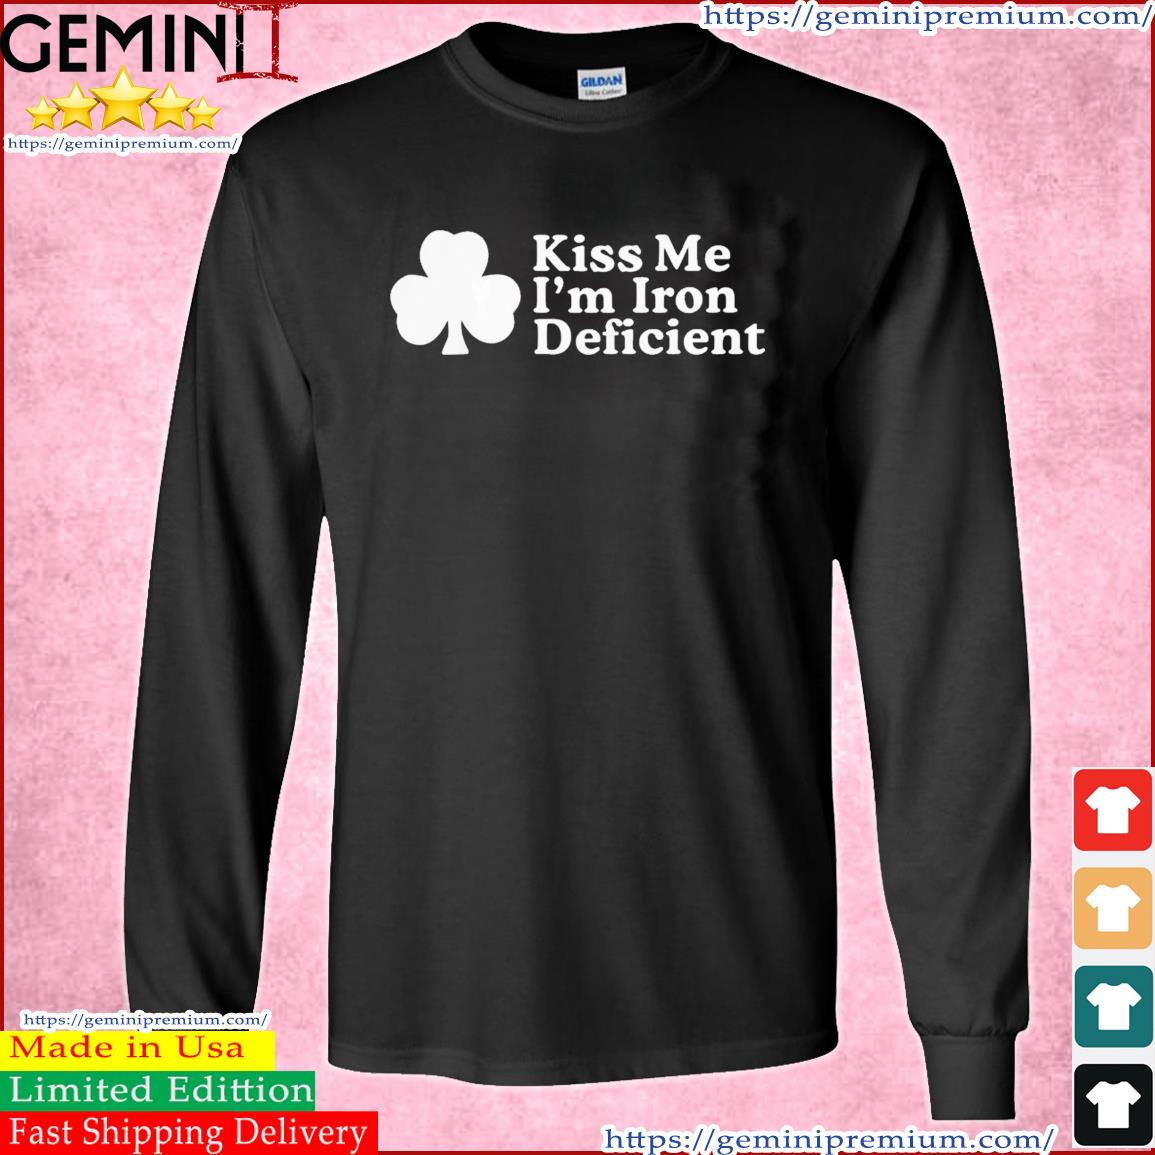 Kiss Me, I'm Iron Deficient St Patrick's Day Shirt Long Sleeve Tee